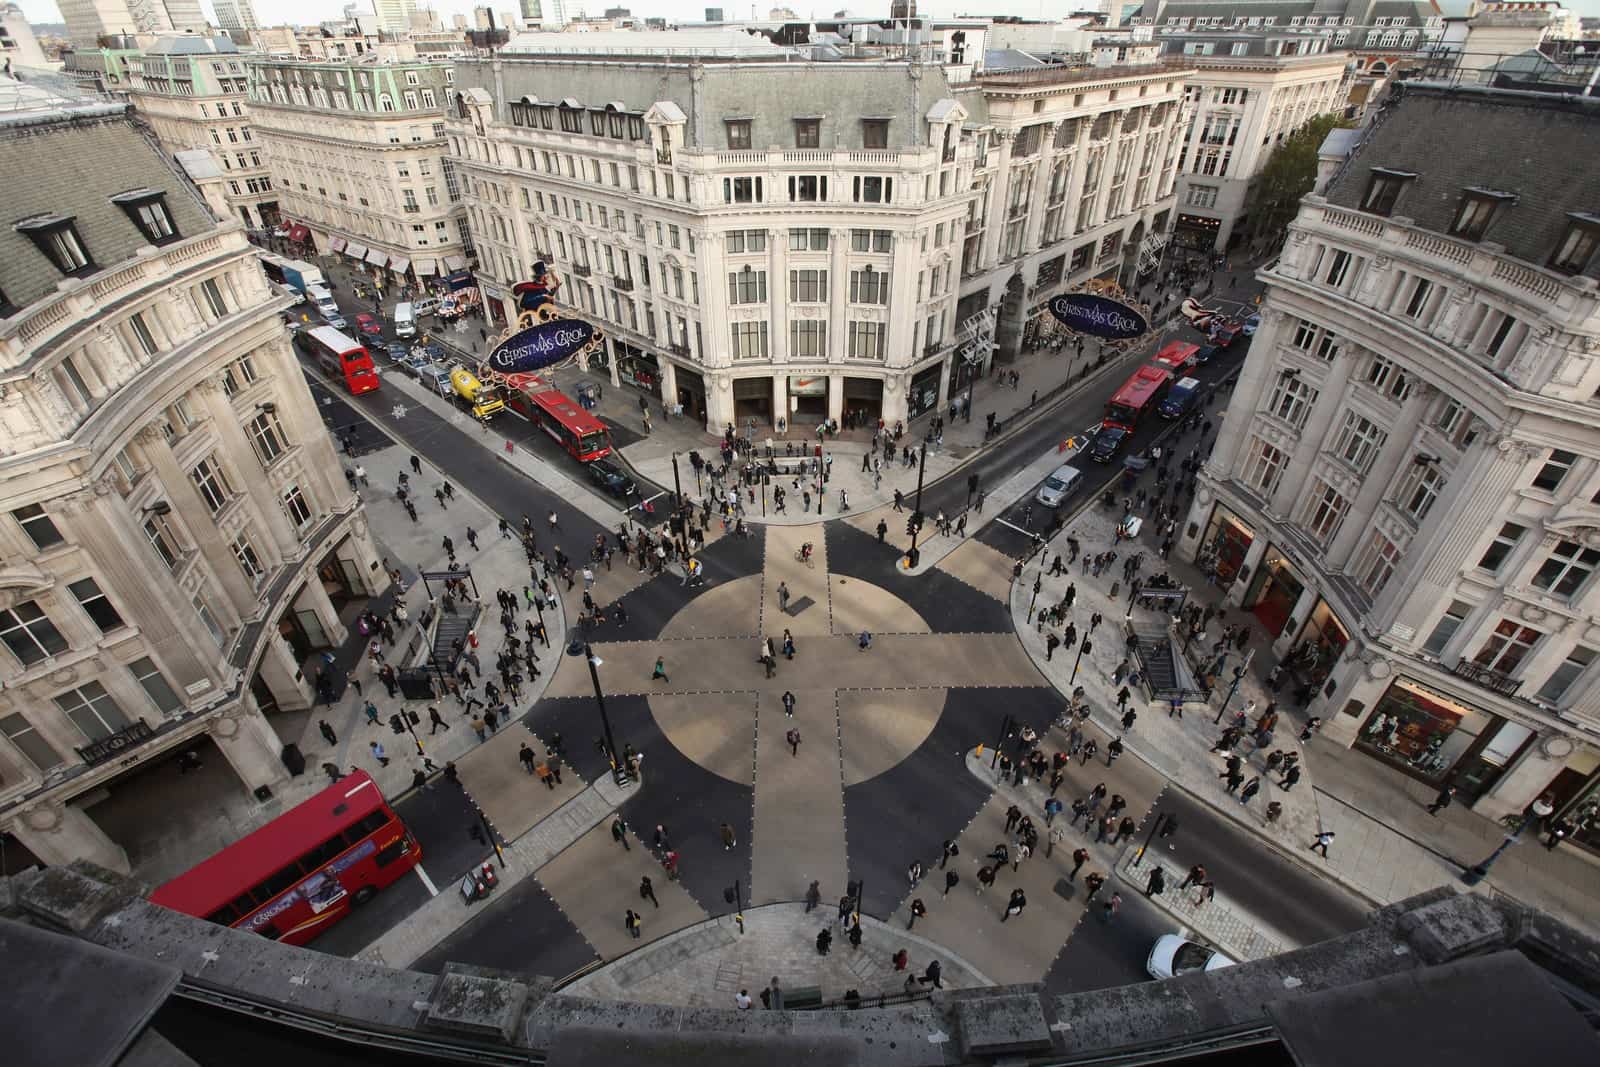 Oxford Circus crossing after the redesign. <span class="figure--credit">Photo by Dan Kitwood / Getty Images</span>